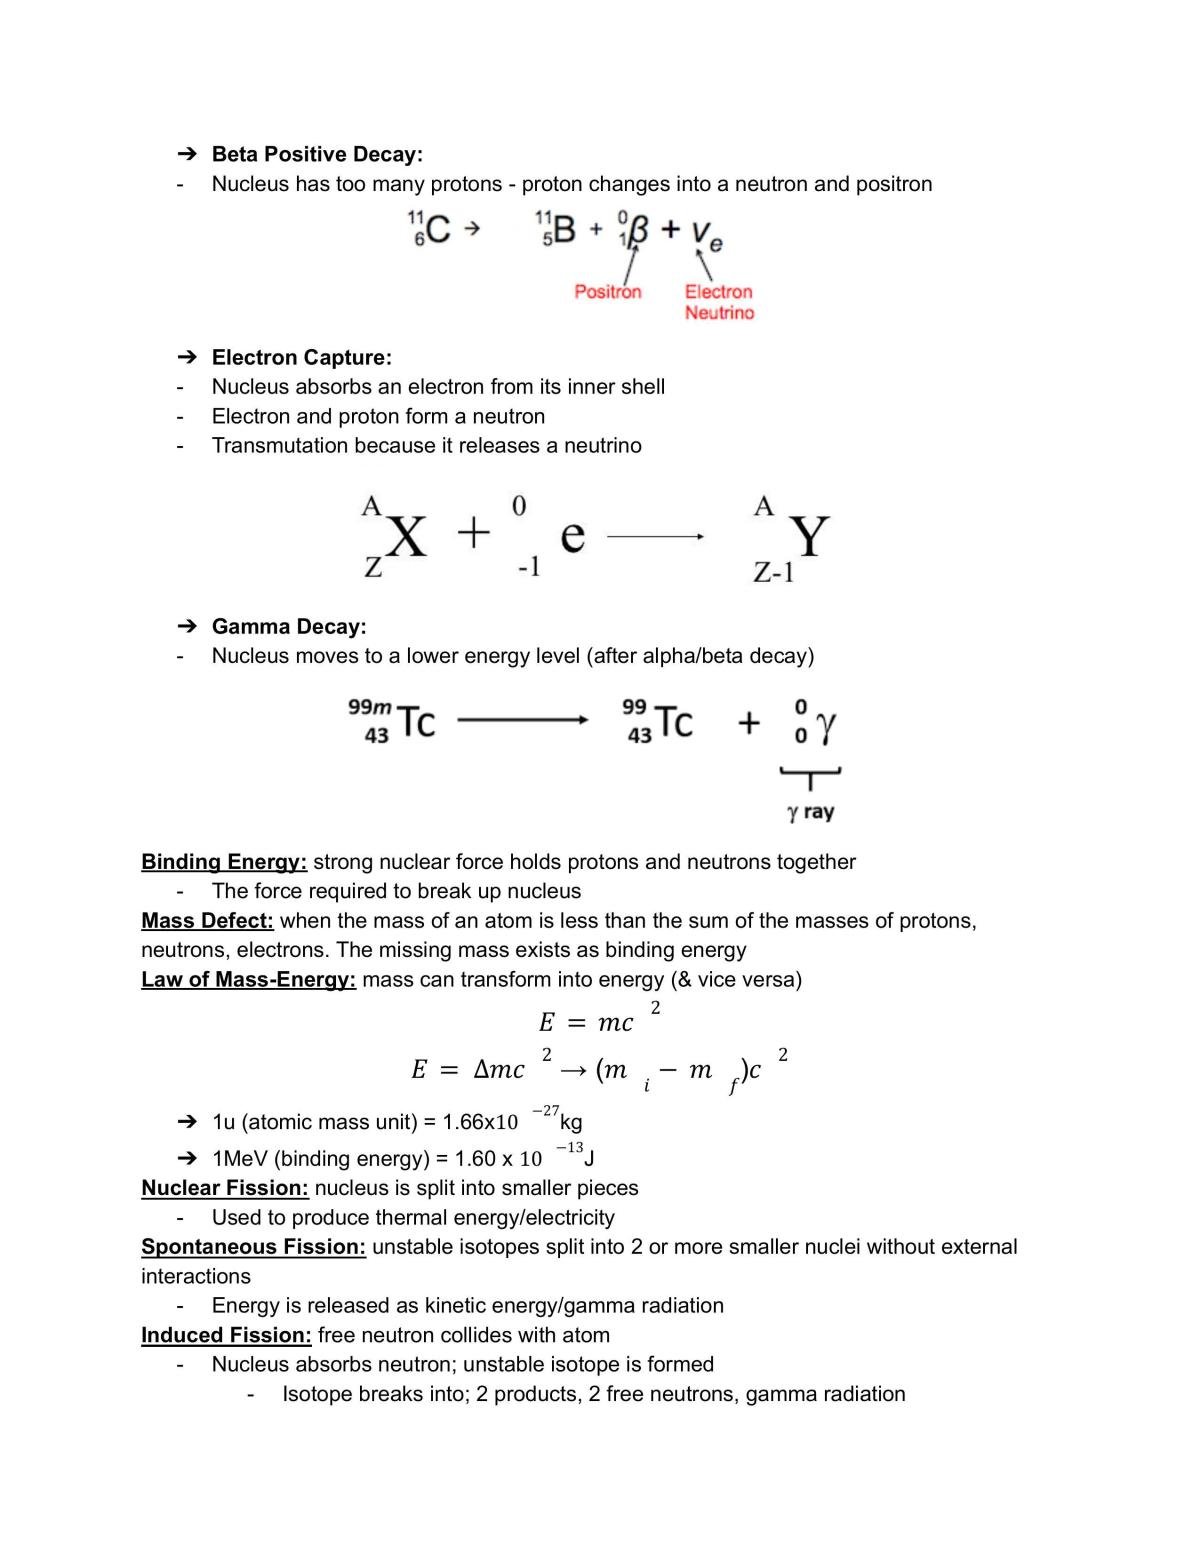 Physics Exam Notes - Page 12